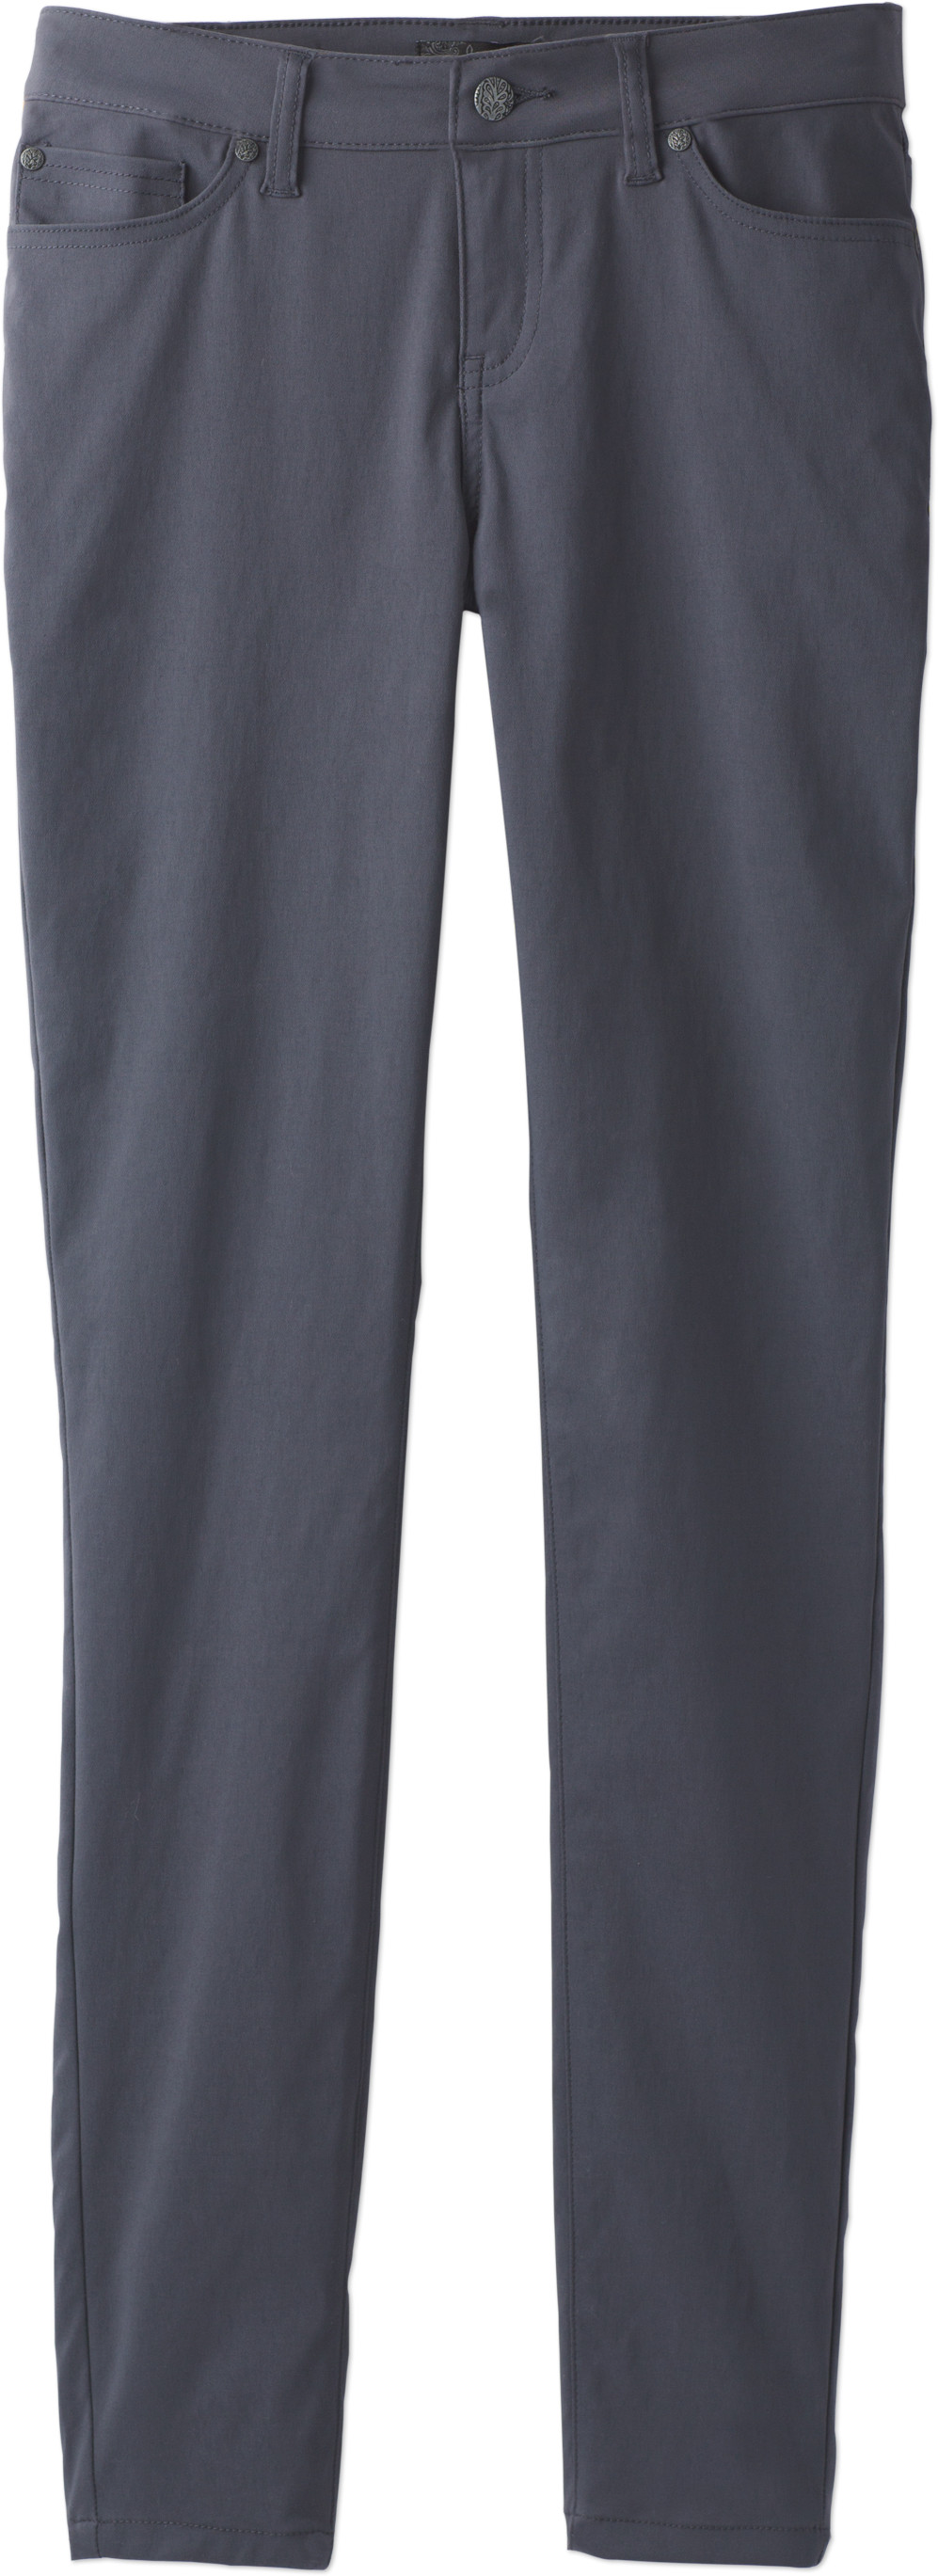 prAna Briann Pant - Women's  Up to 63% Off Free Shipping over $49!